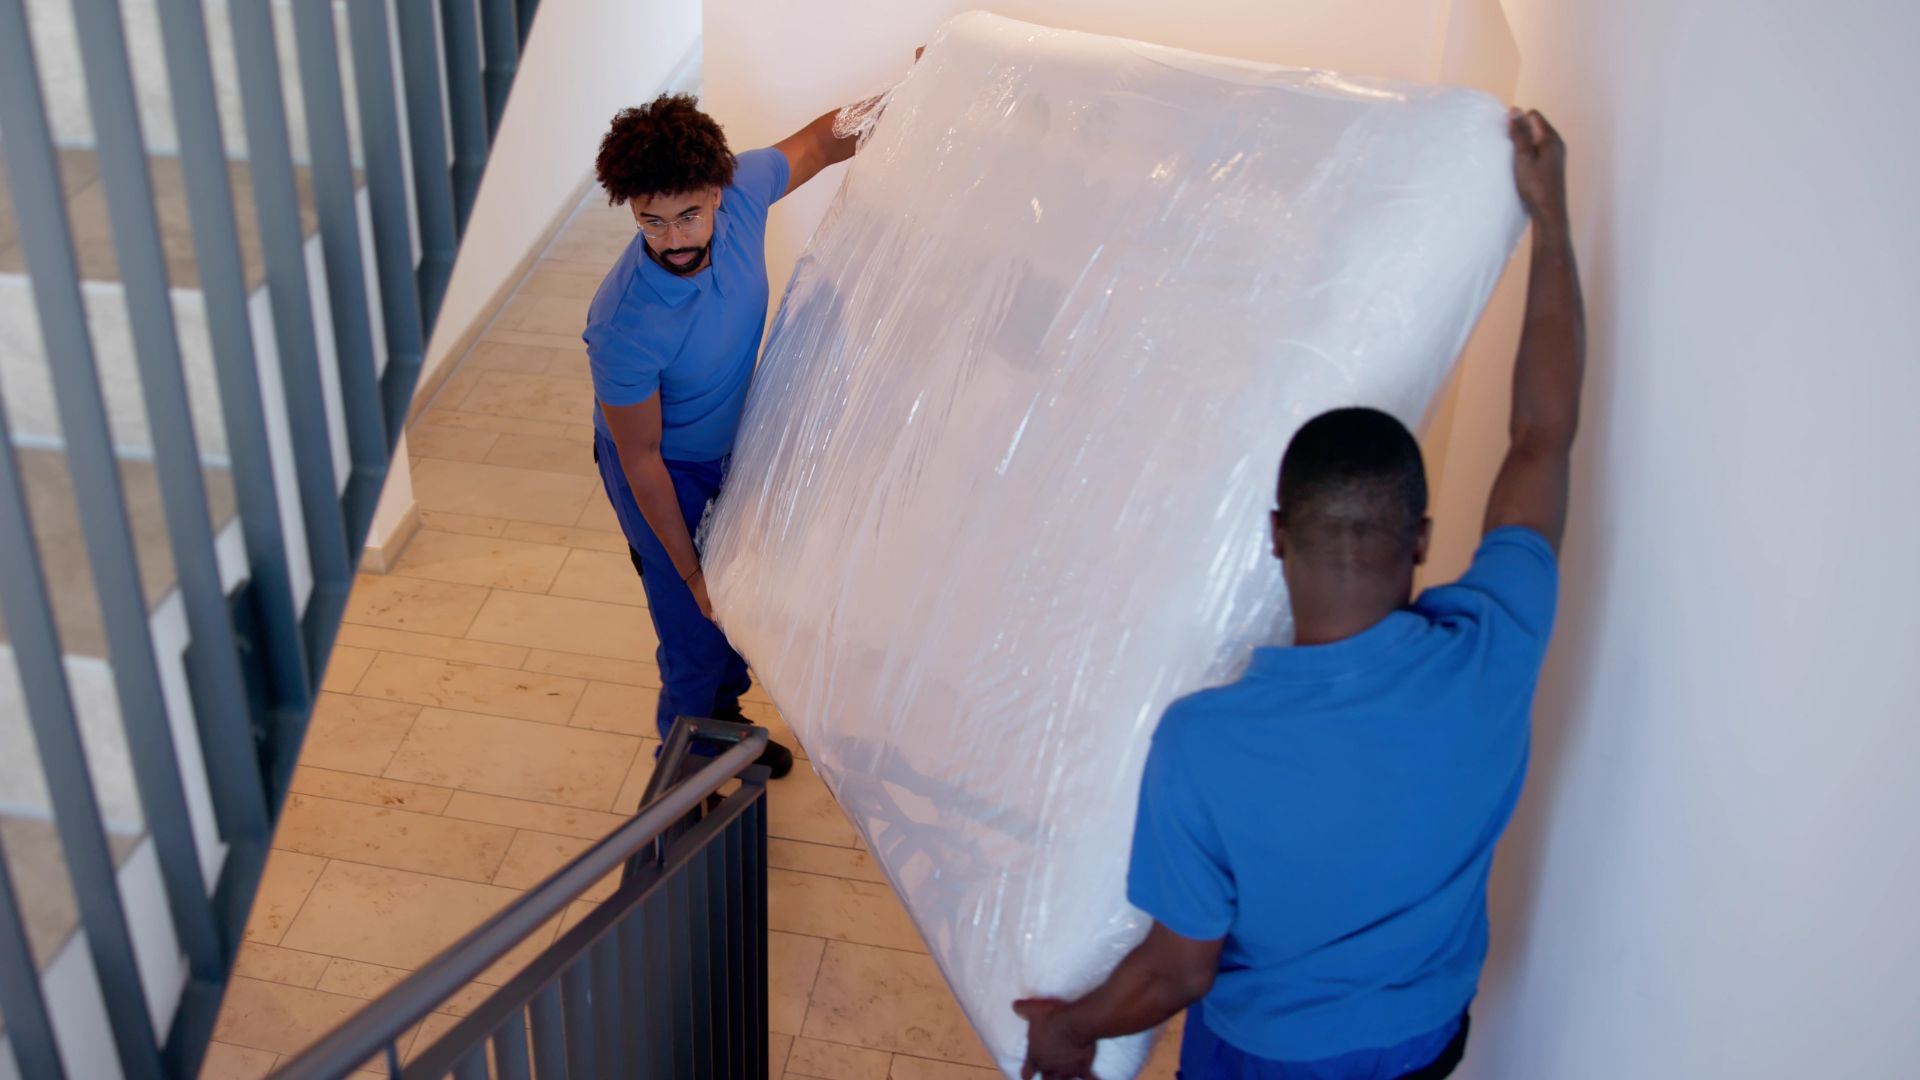 Two men carry a mattress down a flight of stairs